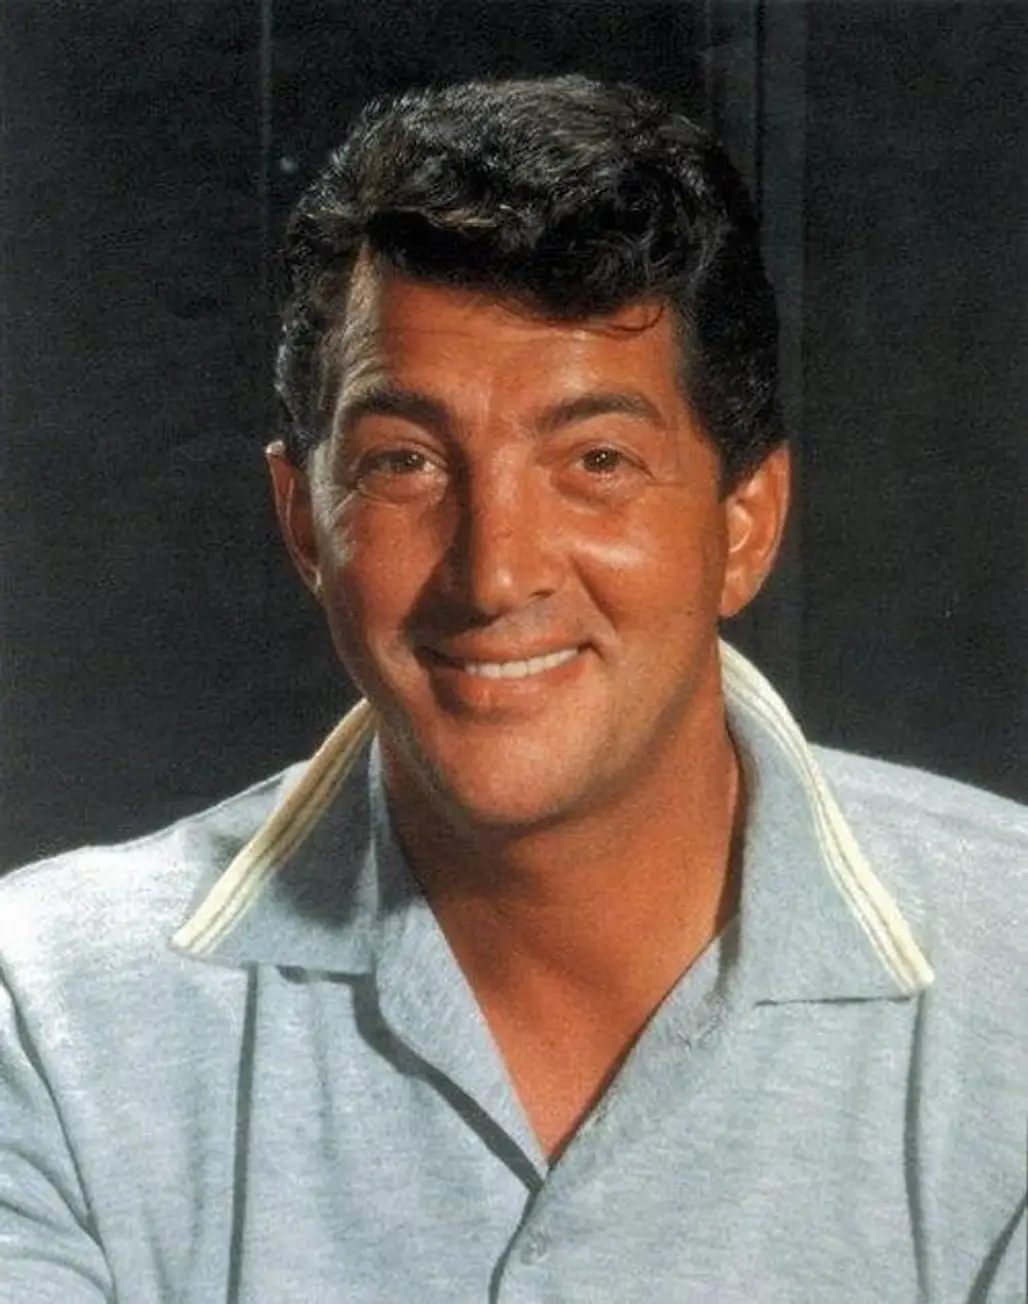 Dean Martin in Mostly Every Film He Has Been in